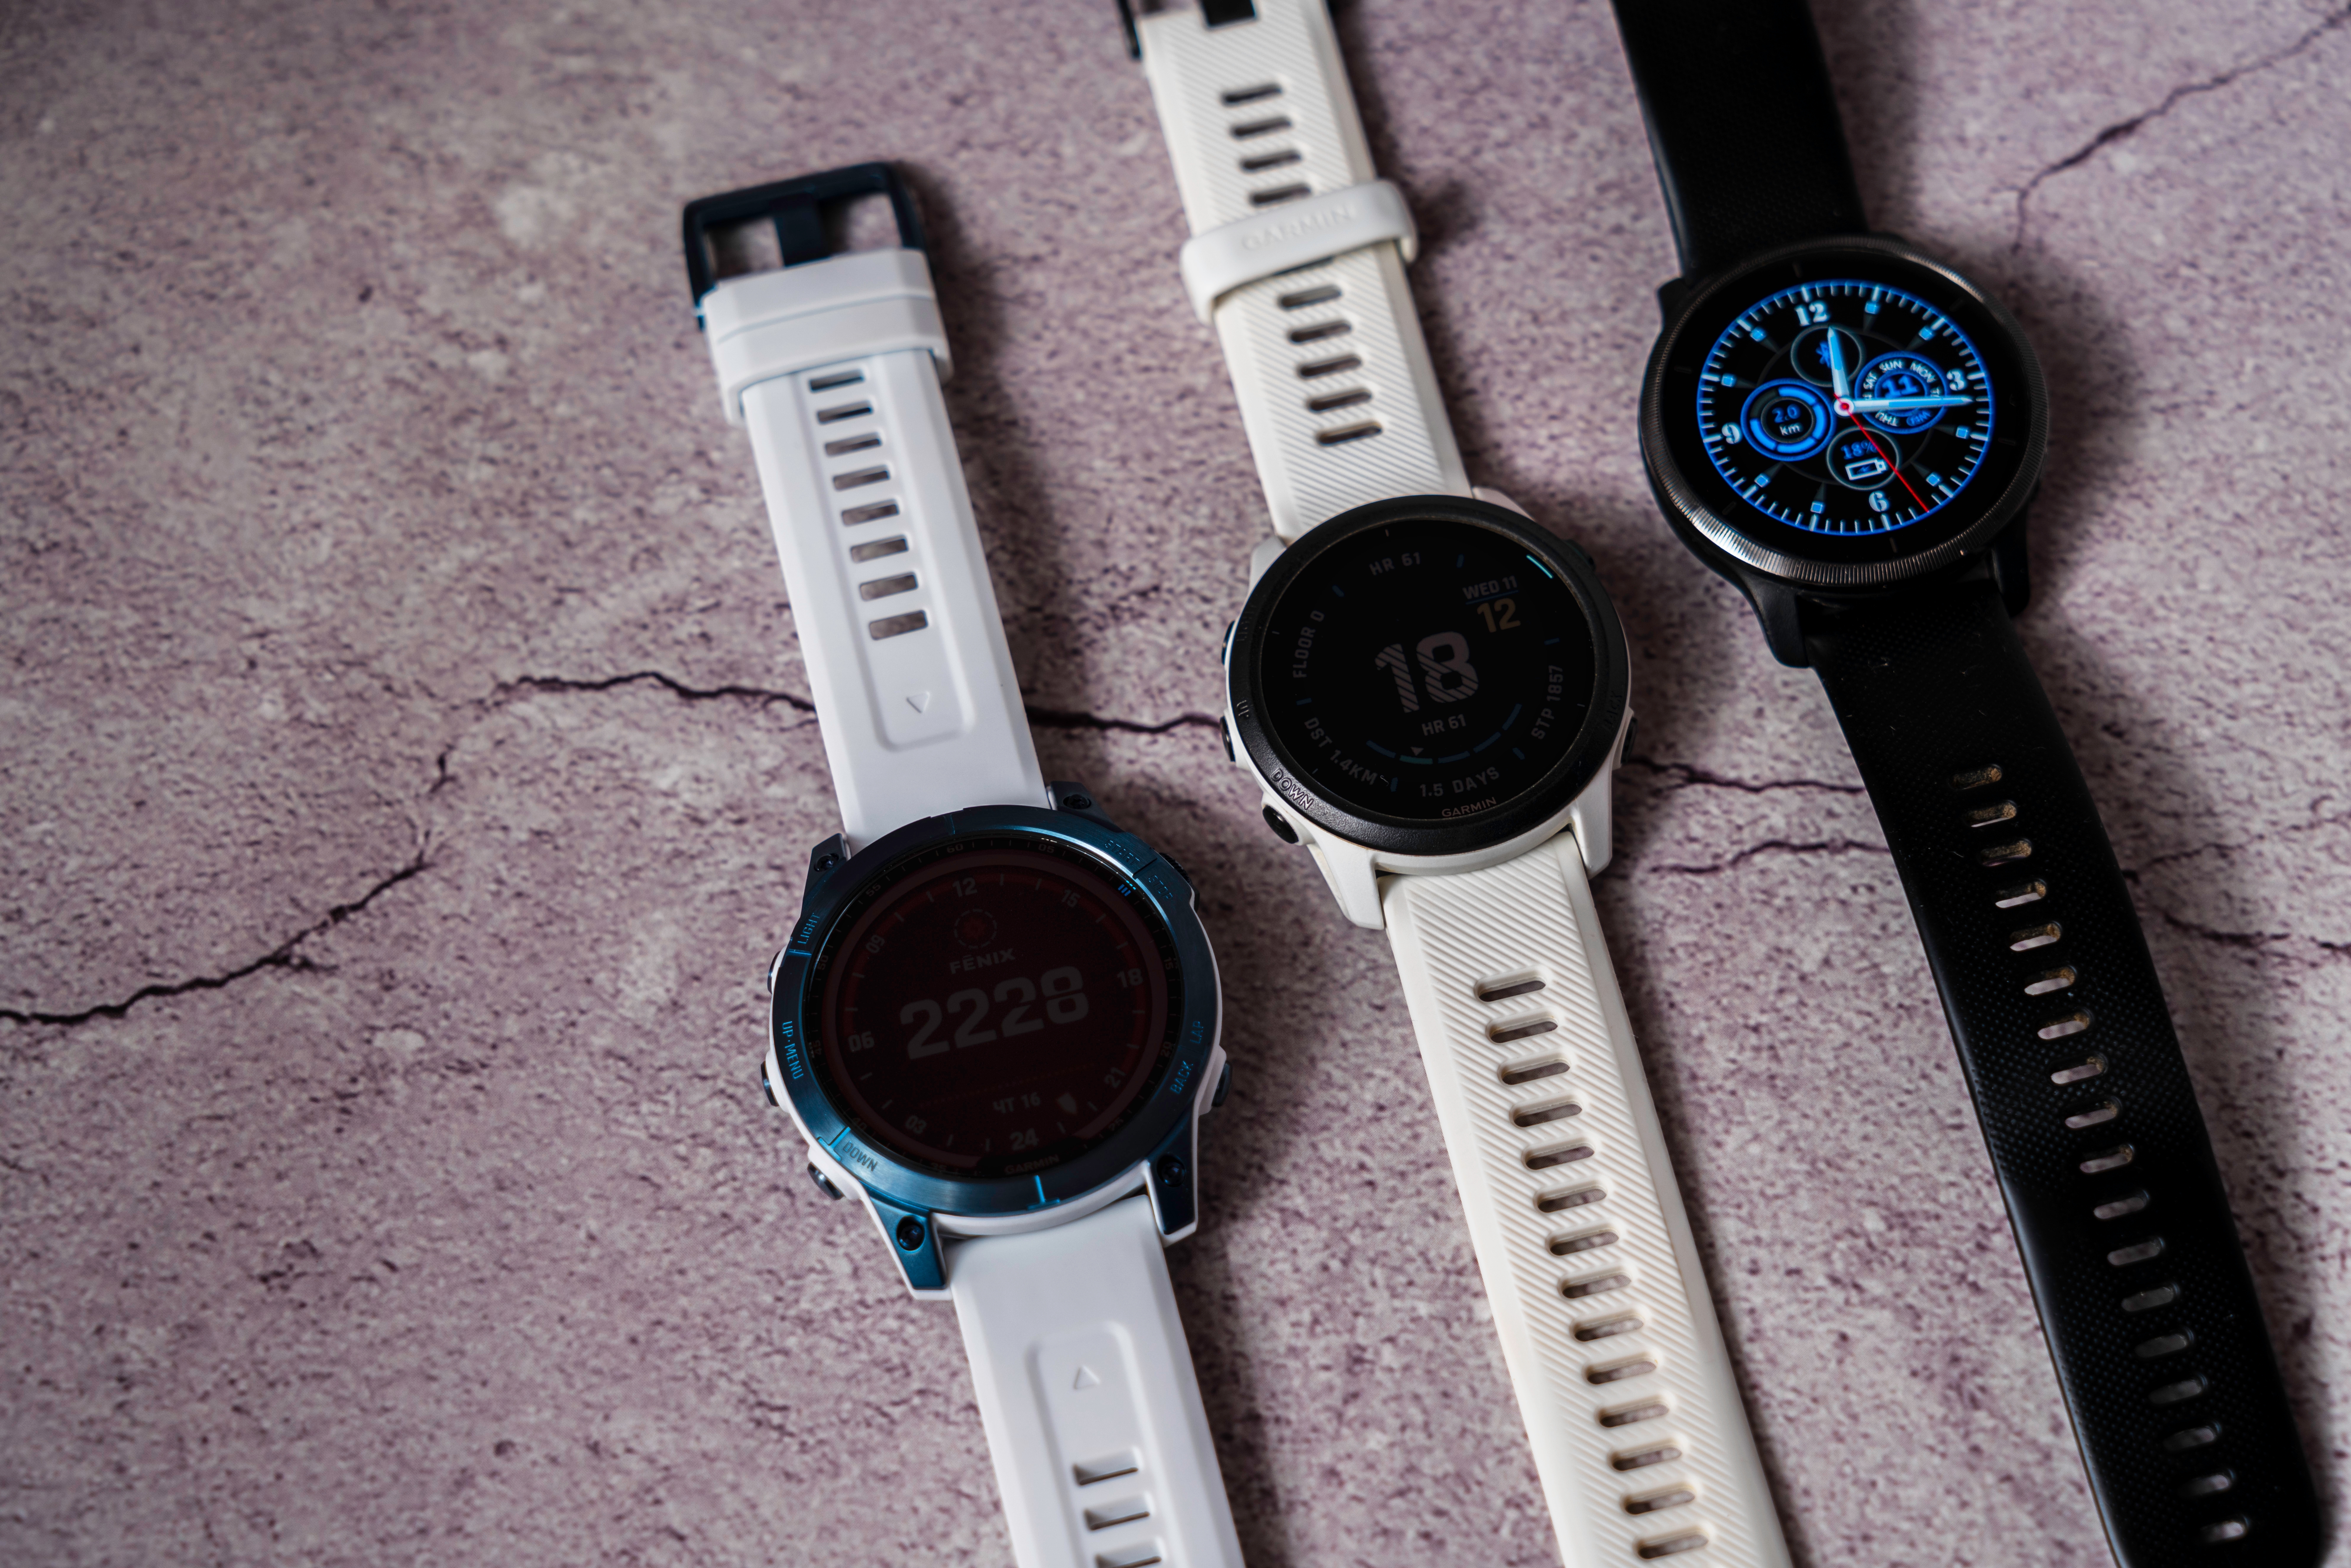 Three smartwatches lined up next to one another